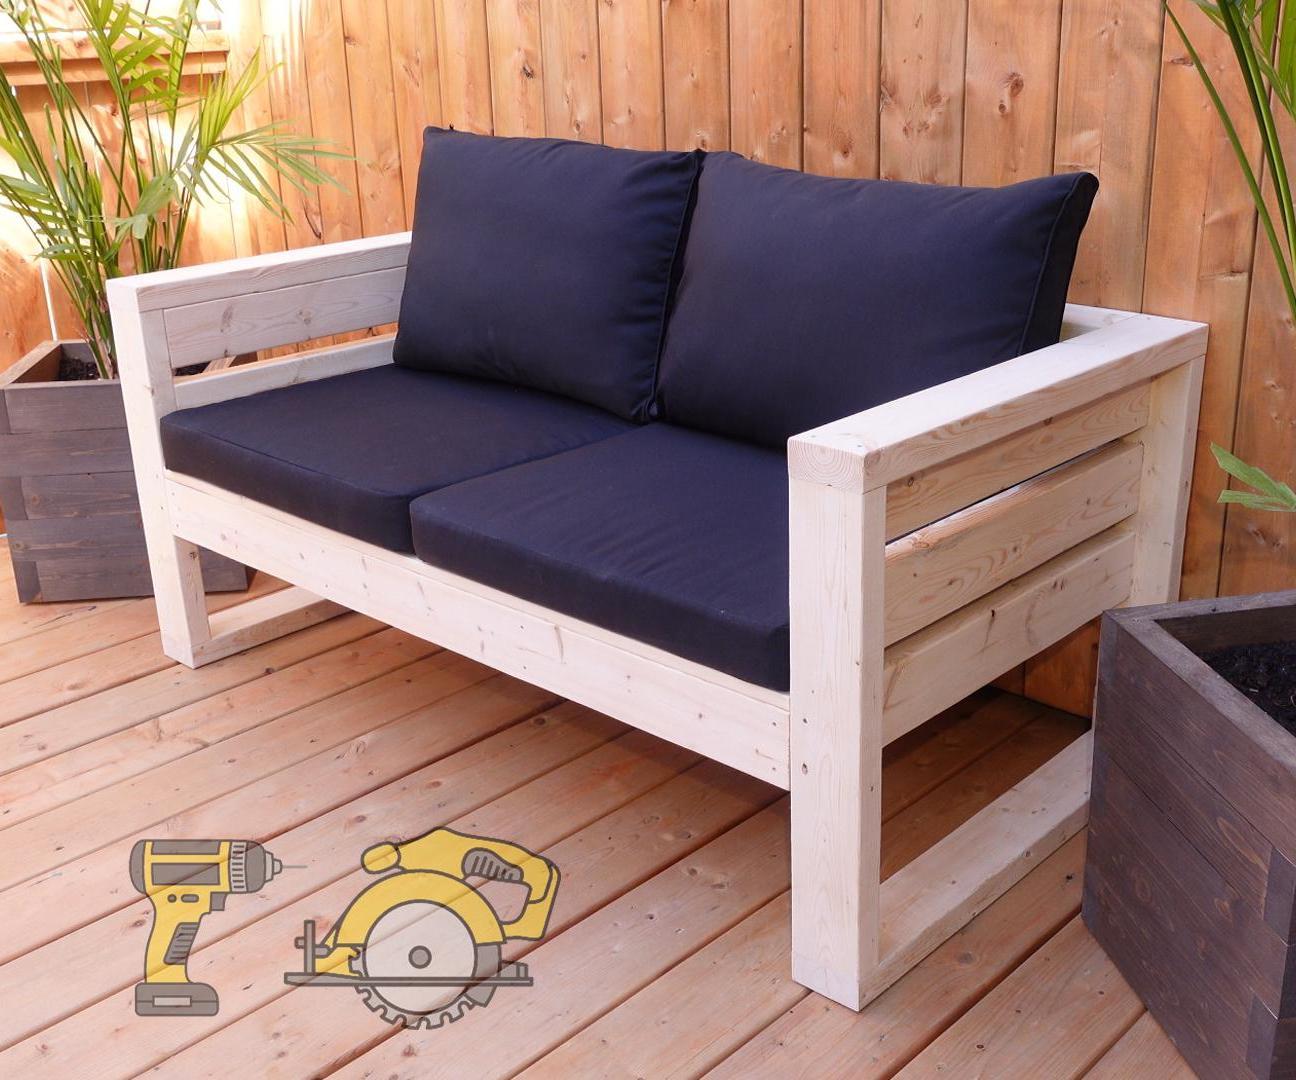 Easy Outdoor Sofa From 2x4s and Two Power Tools!